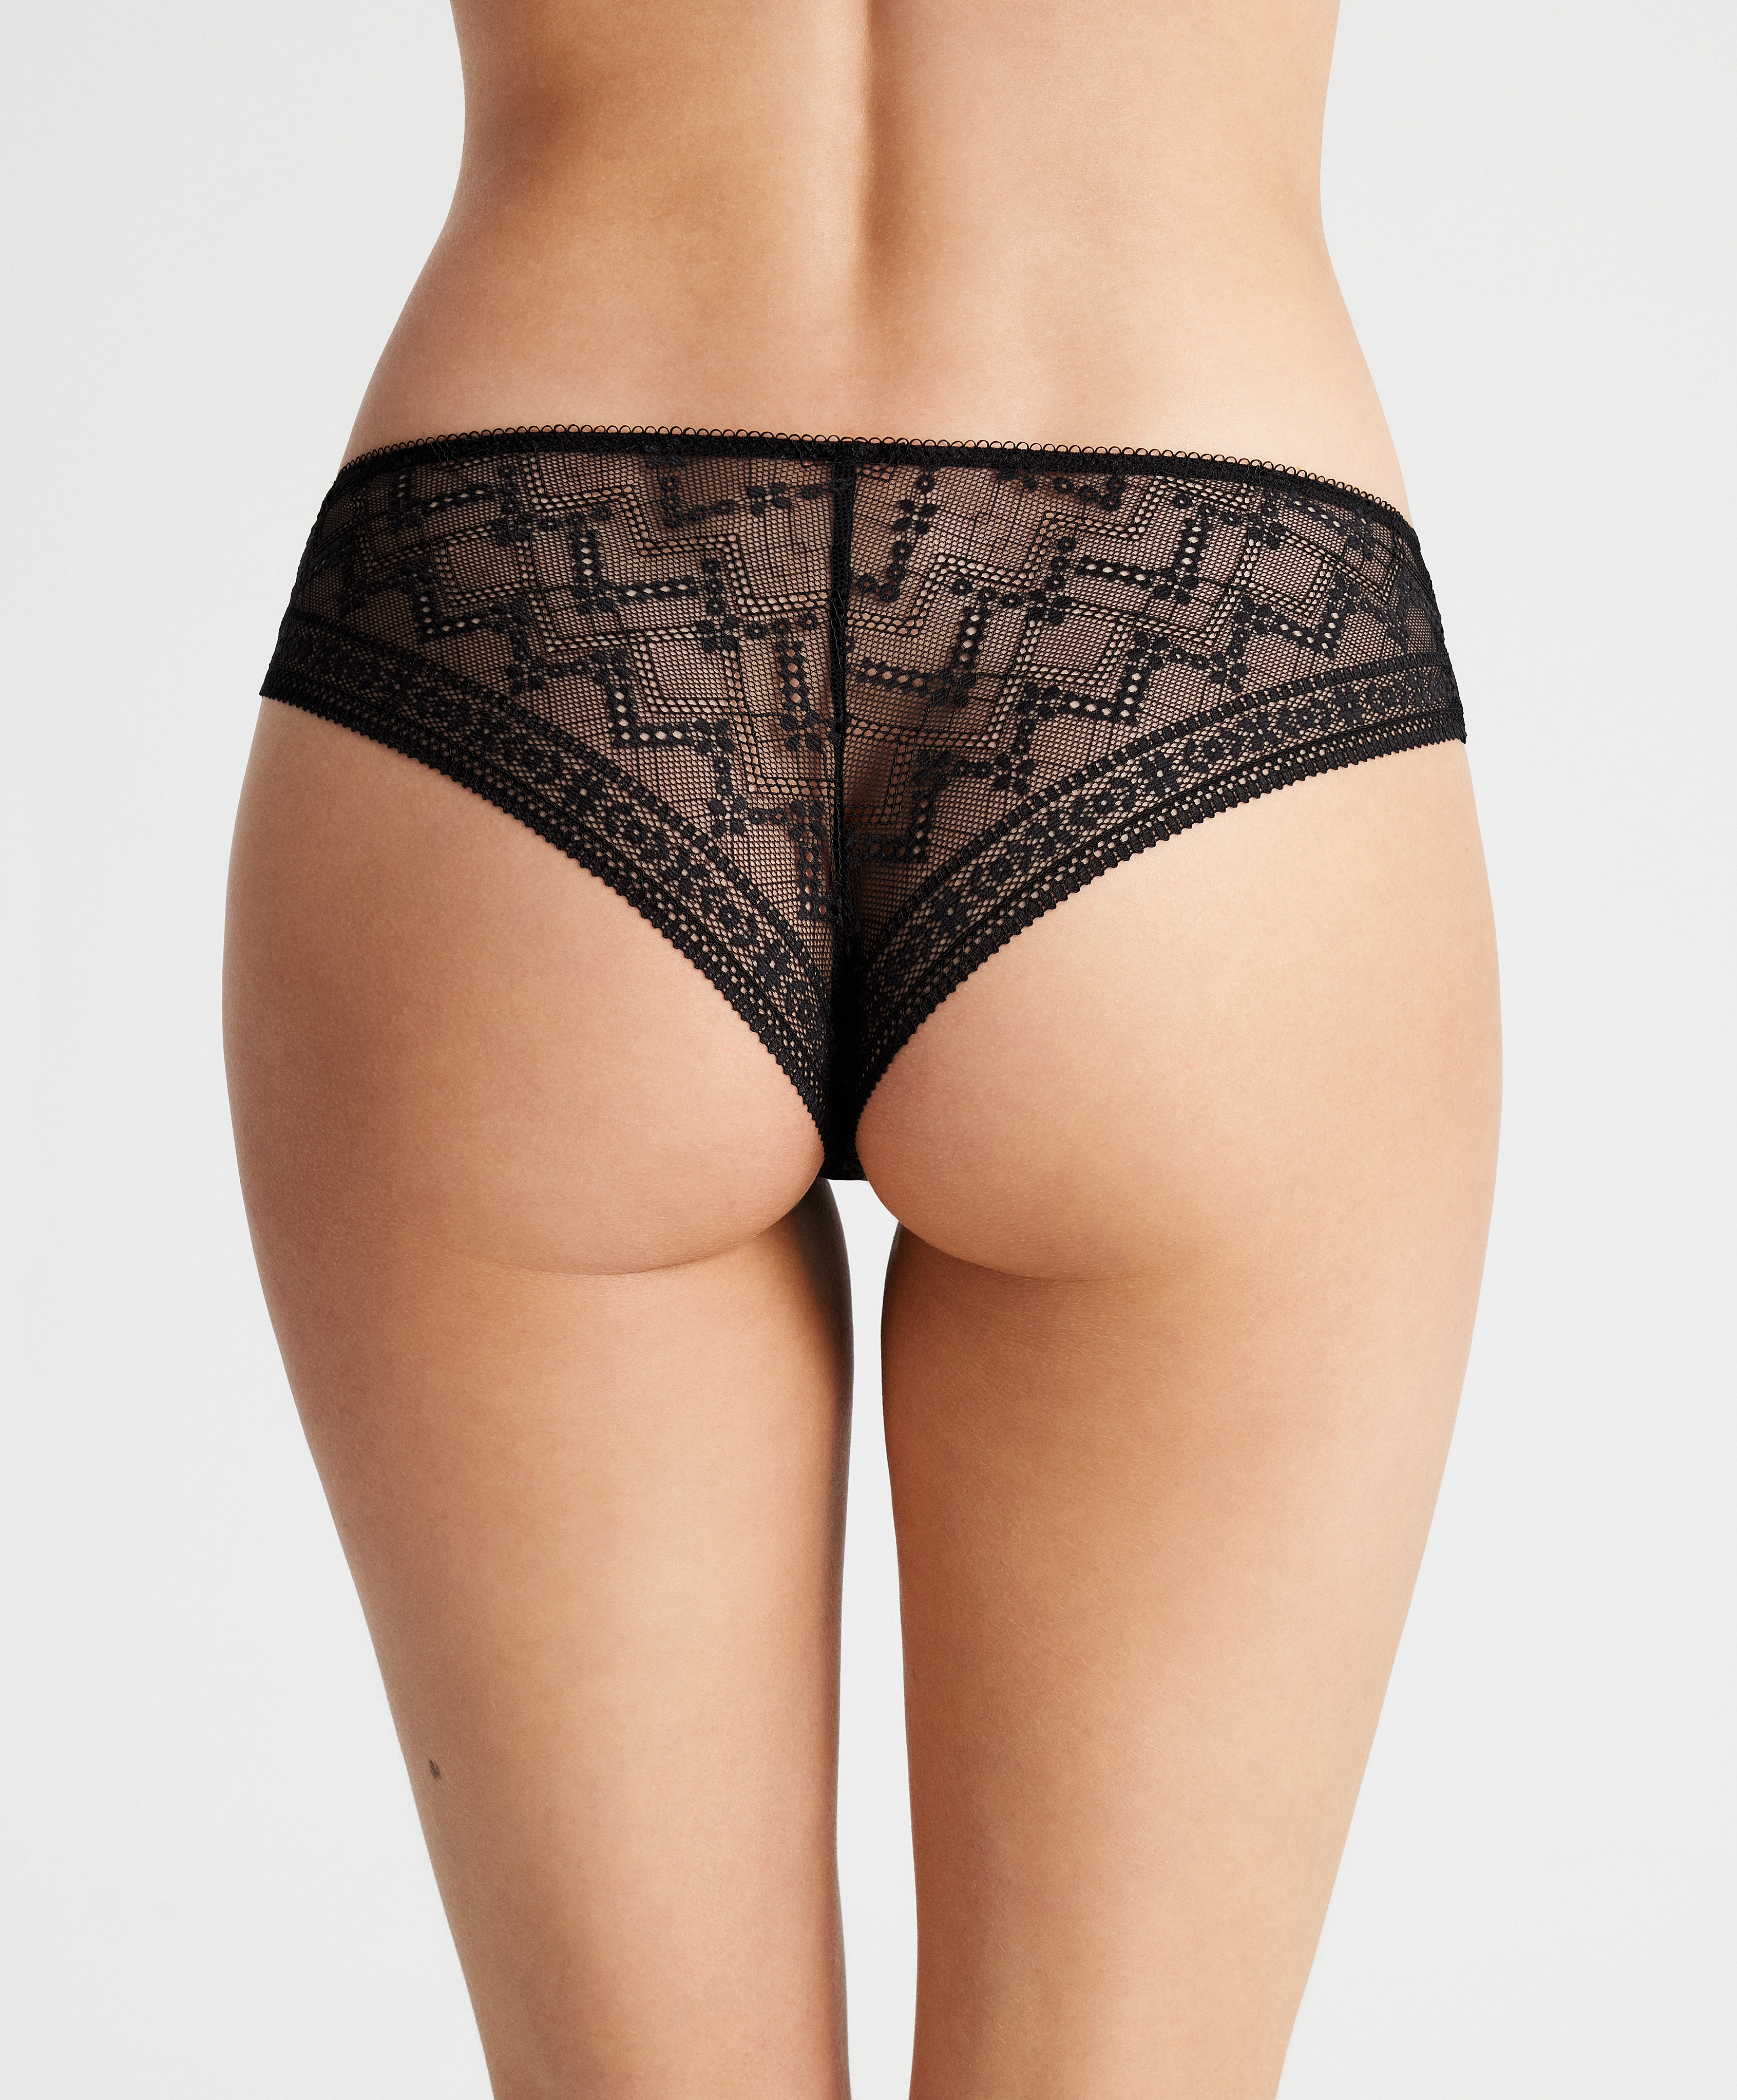 High-waisted Brazilian briefs in floral lace